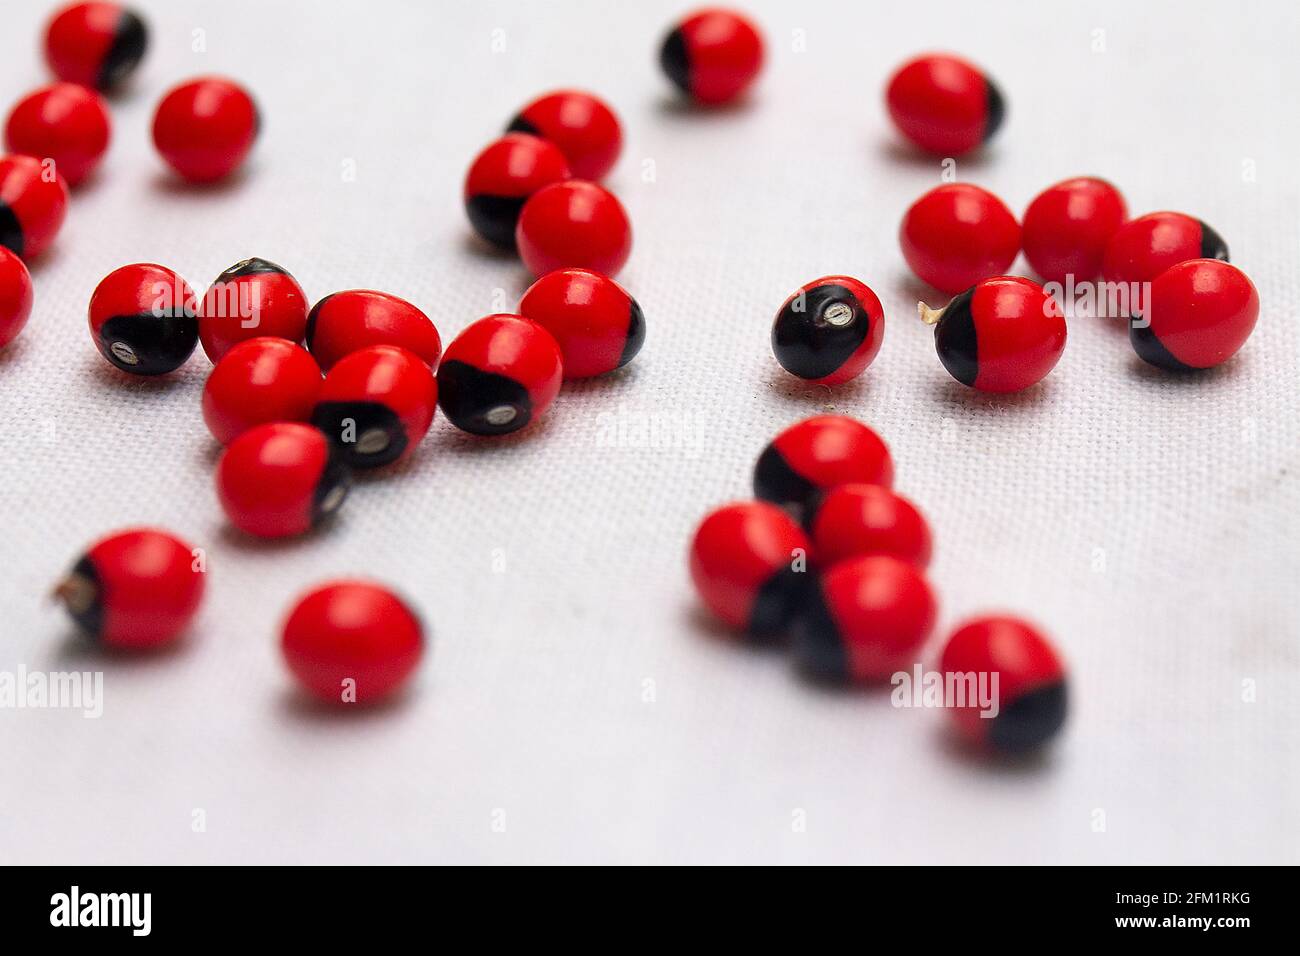 Selective focus shot of bright red abrus precatorius beans on a white table Stock Photo